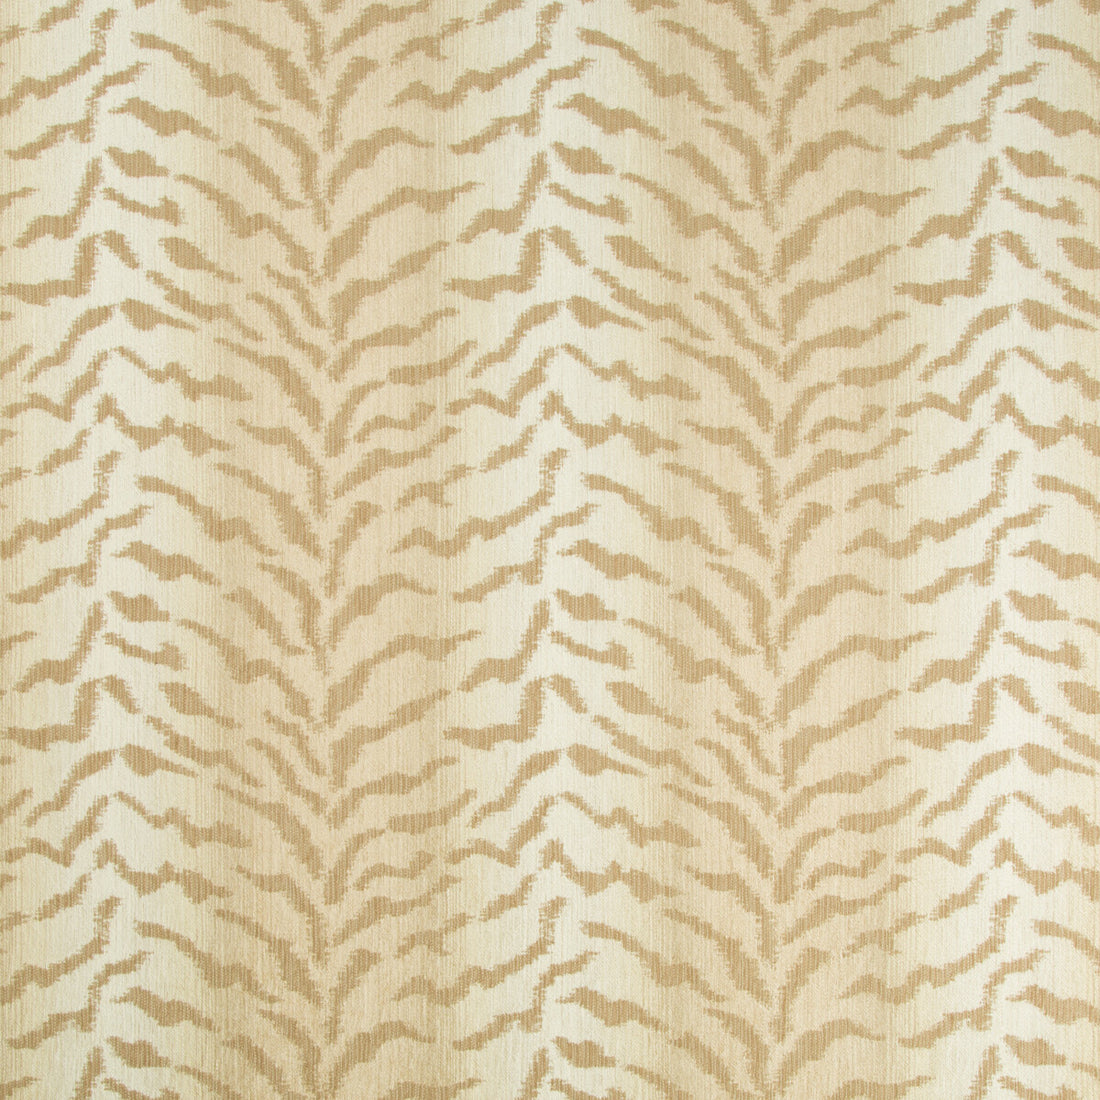 Kravet Design fabric in 35010-16 color - pattern 35010.16.0 - by Kravet Design in the Performance Crypton Home collection